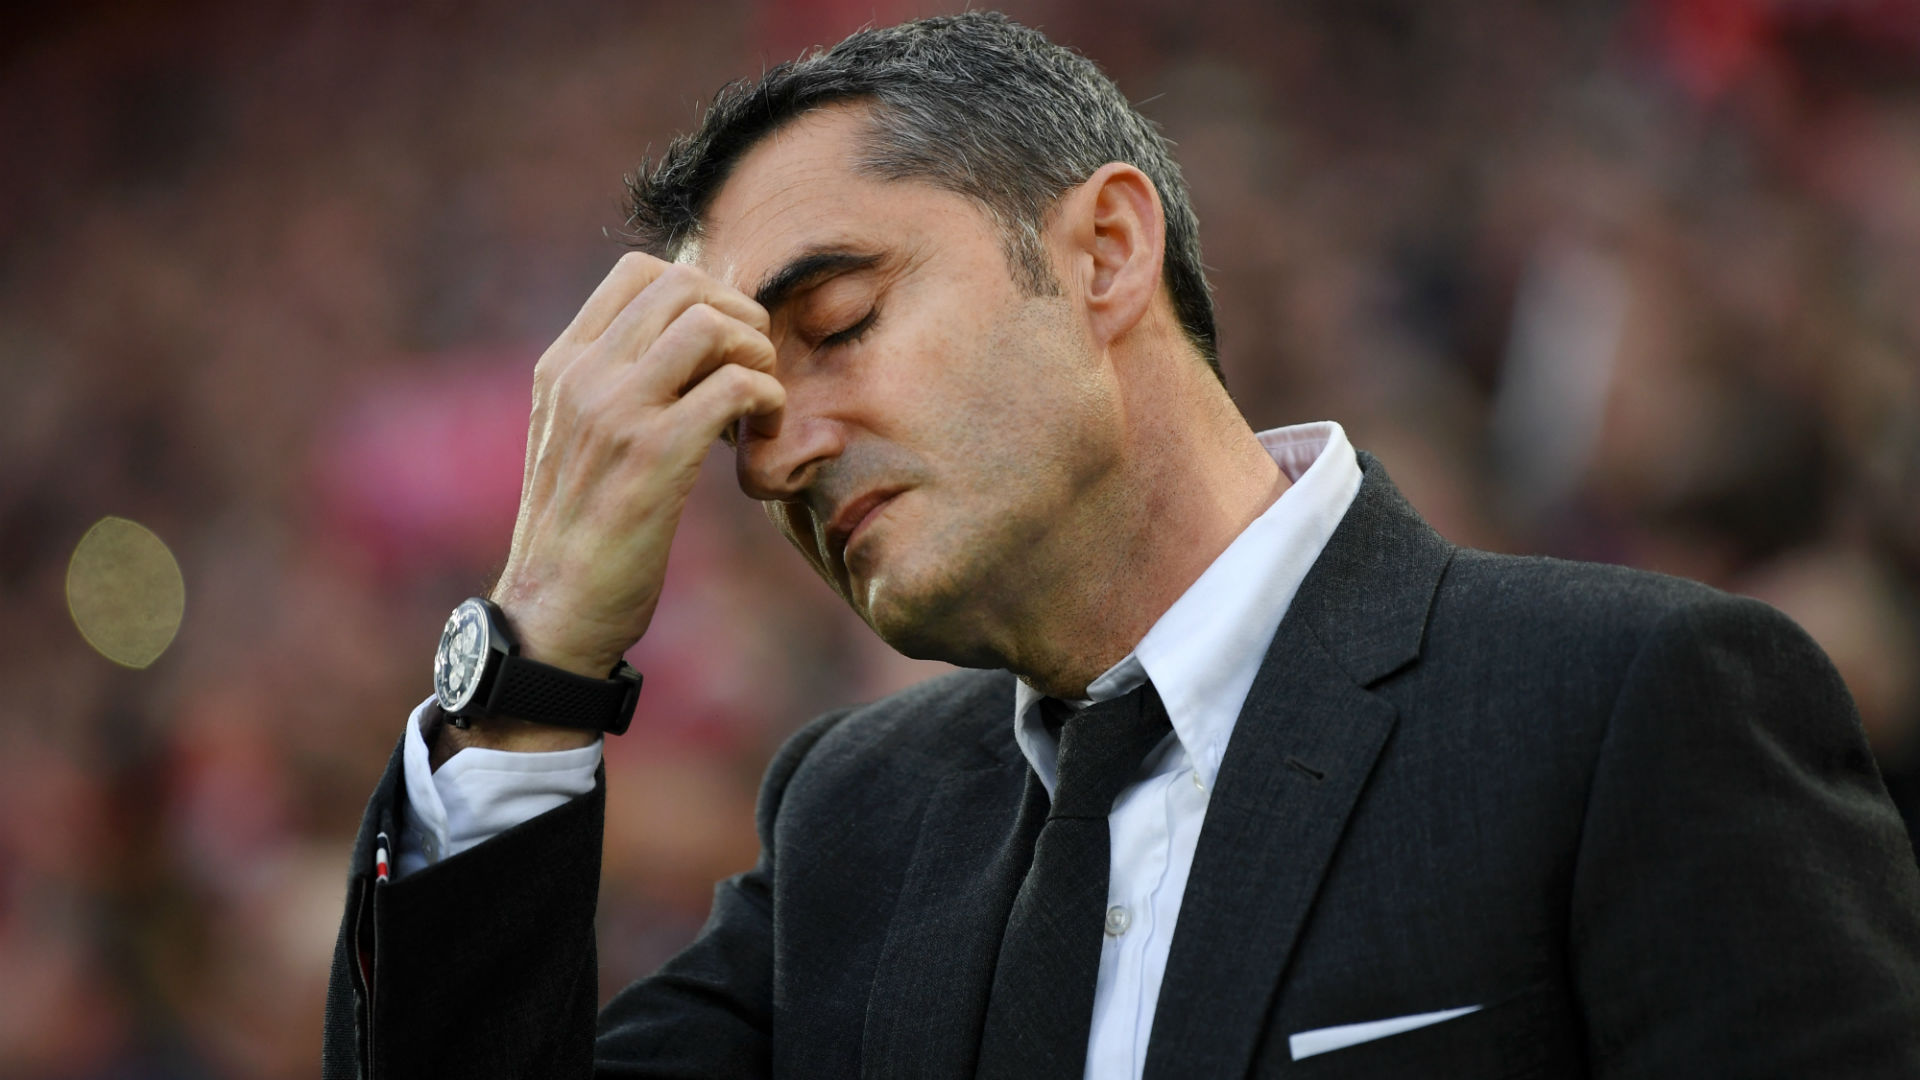 Amid reports he is starting to lose the confidence of some of his players, Ernesto Valverde needs a response from Barcelona.